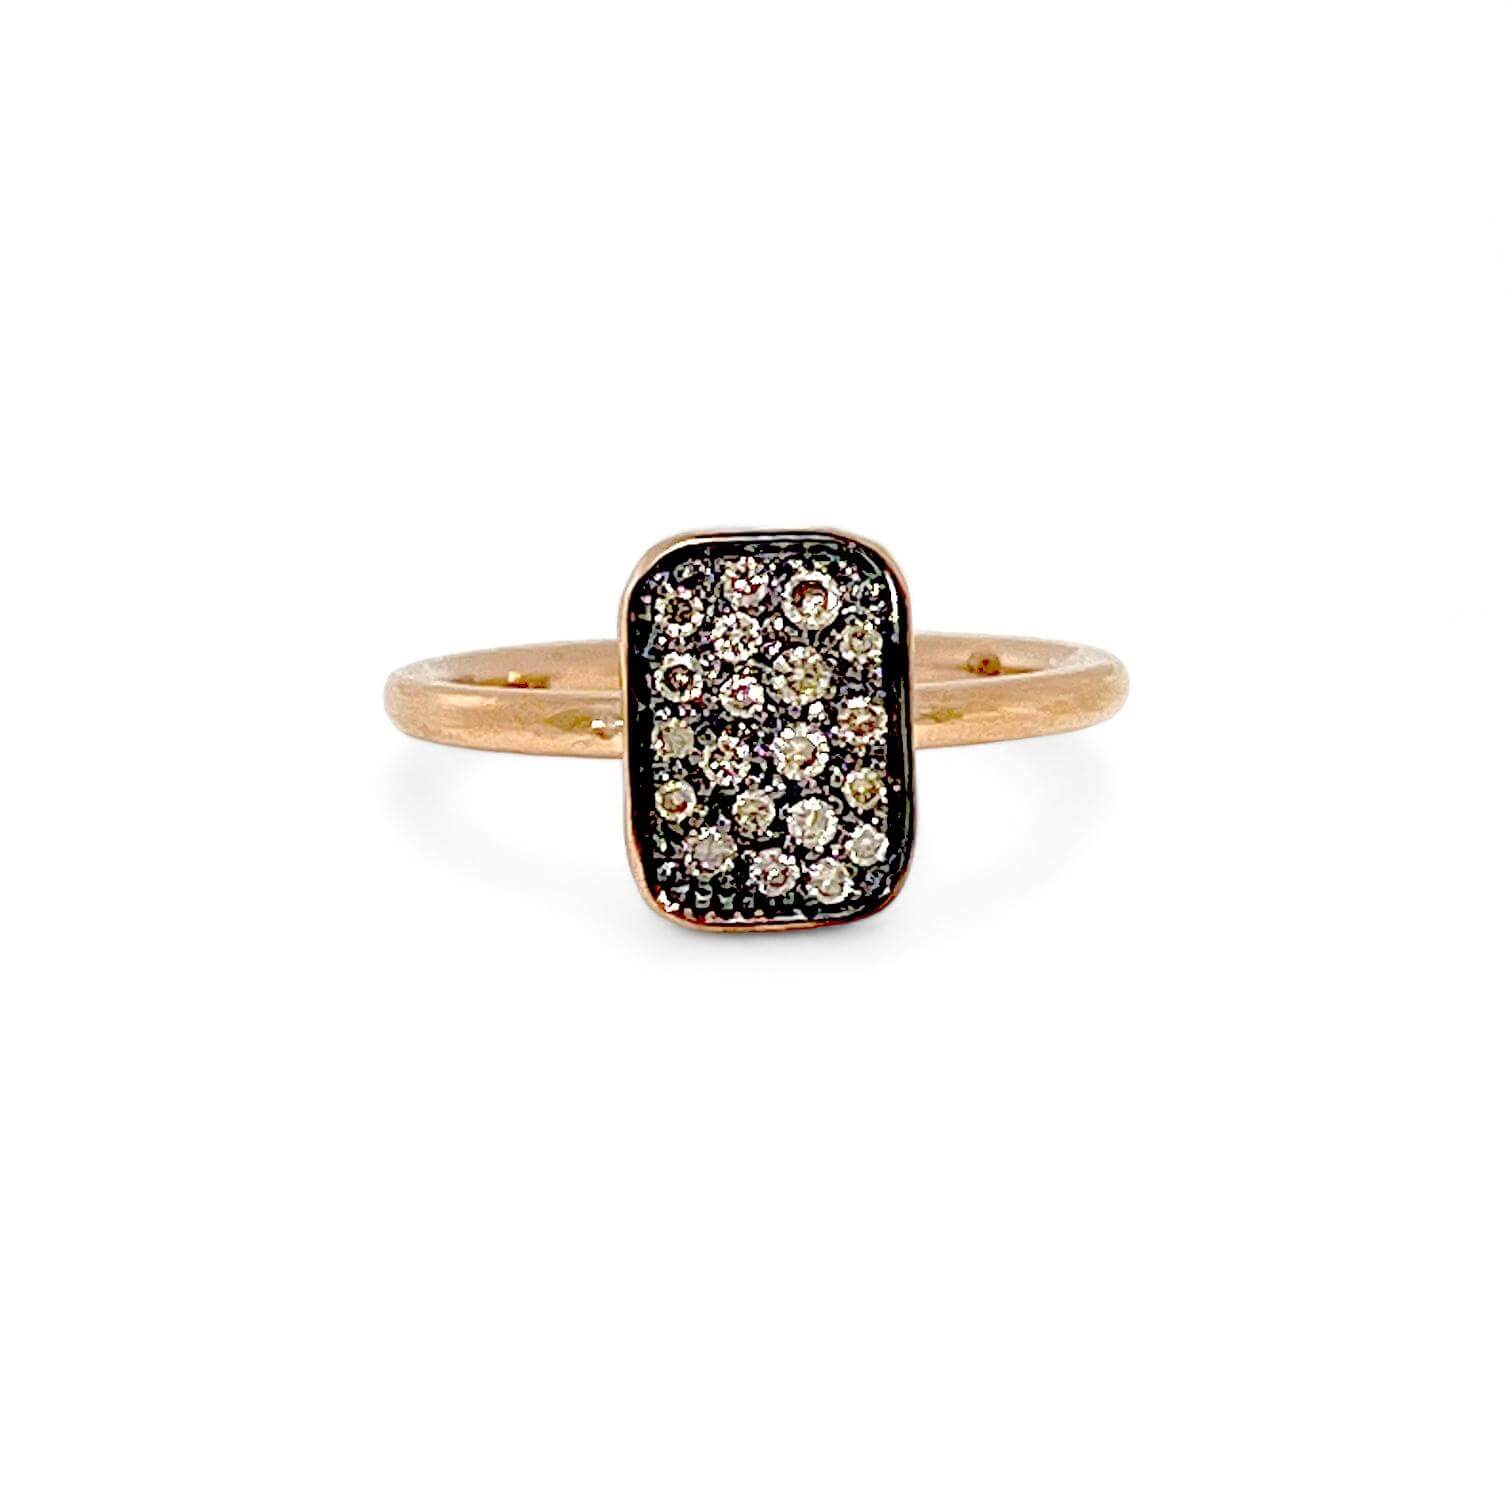 TOPPINA rose gold and diamond ring Art. 7773BW